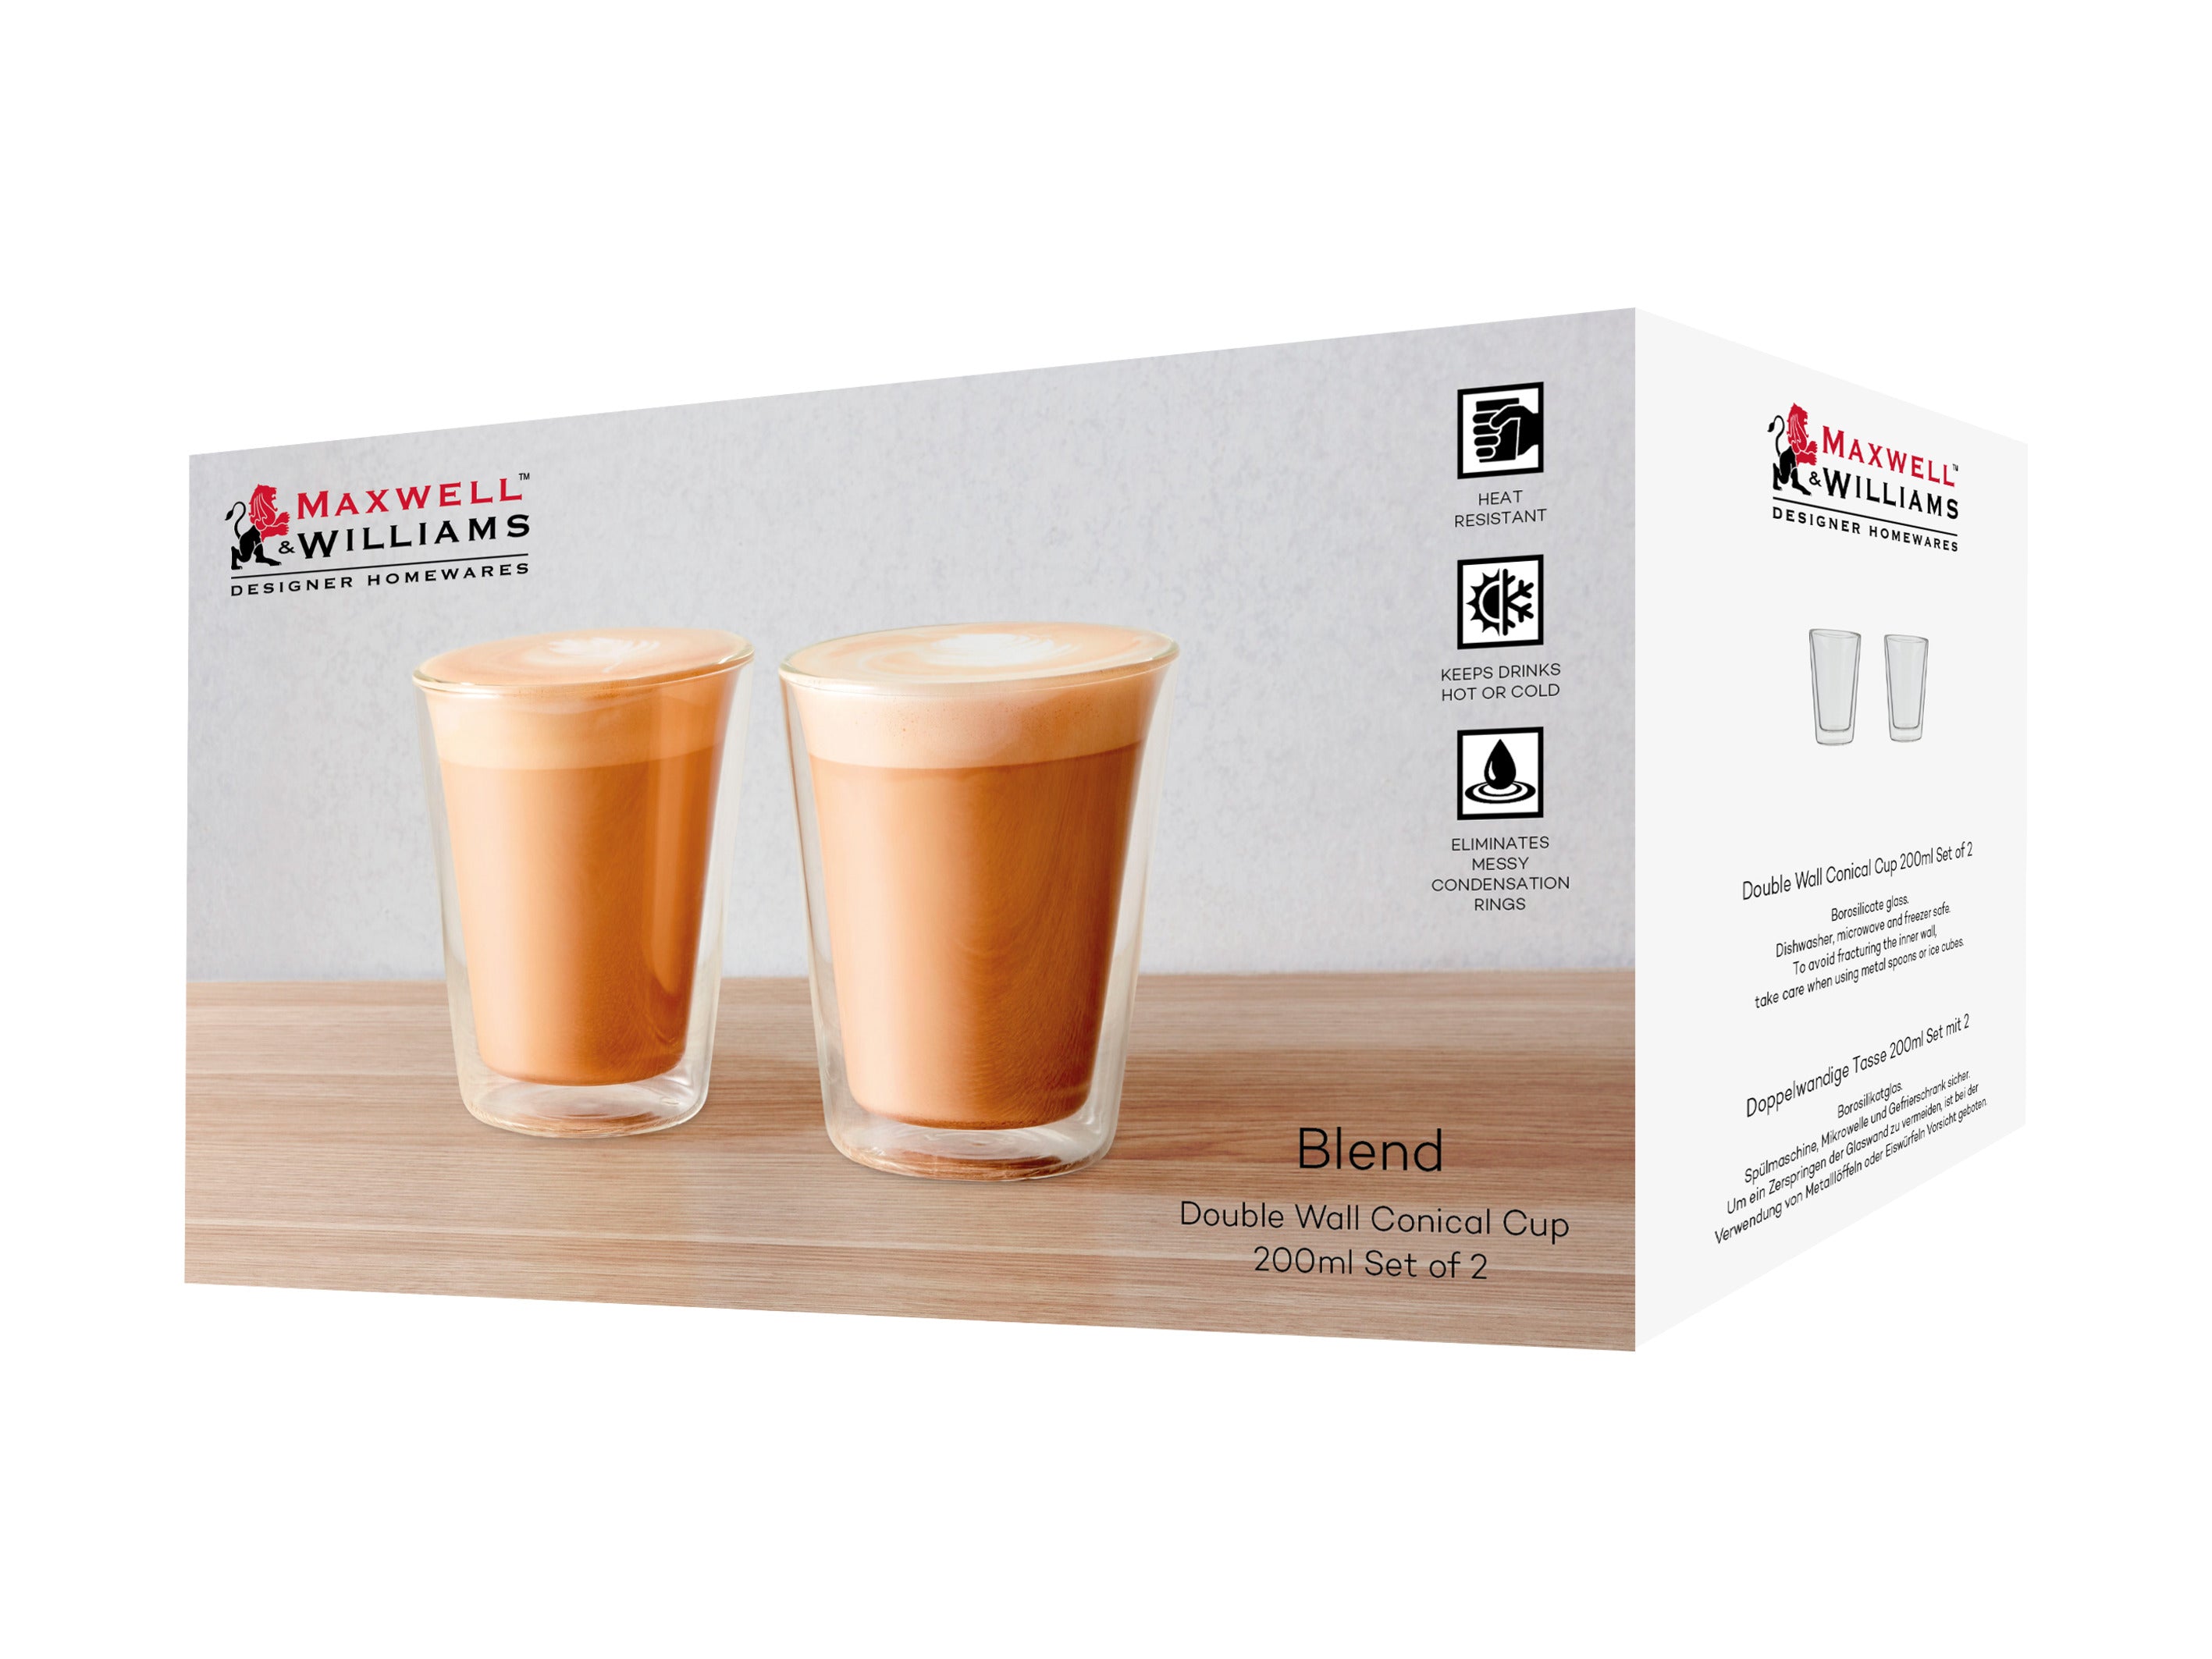 Maxwell & Williams Blend Double Wall Conical Cups 200ml Set of 2